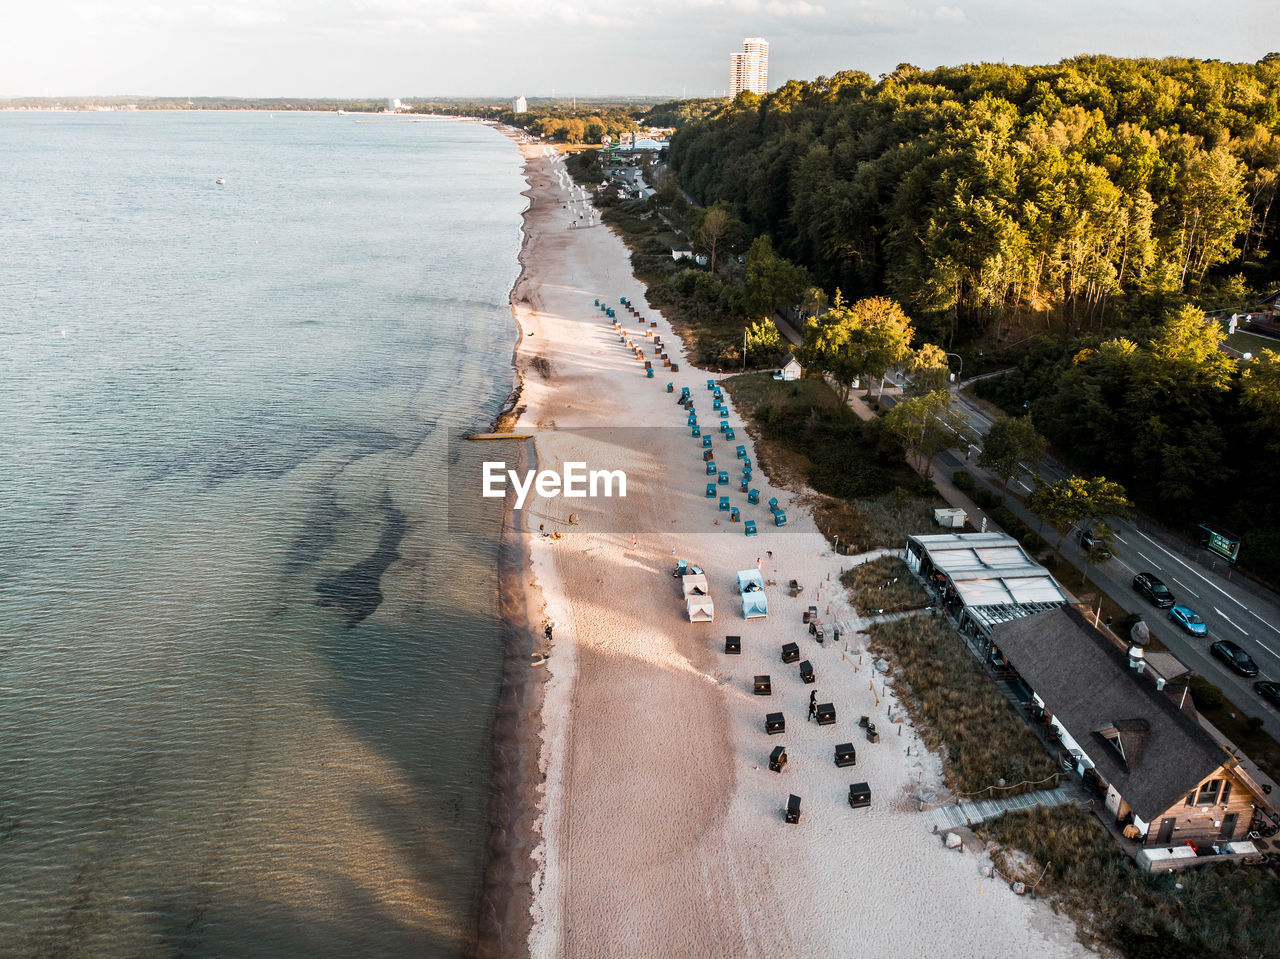 Aerial drone view over the east sea in germany with beach huts.